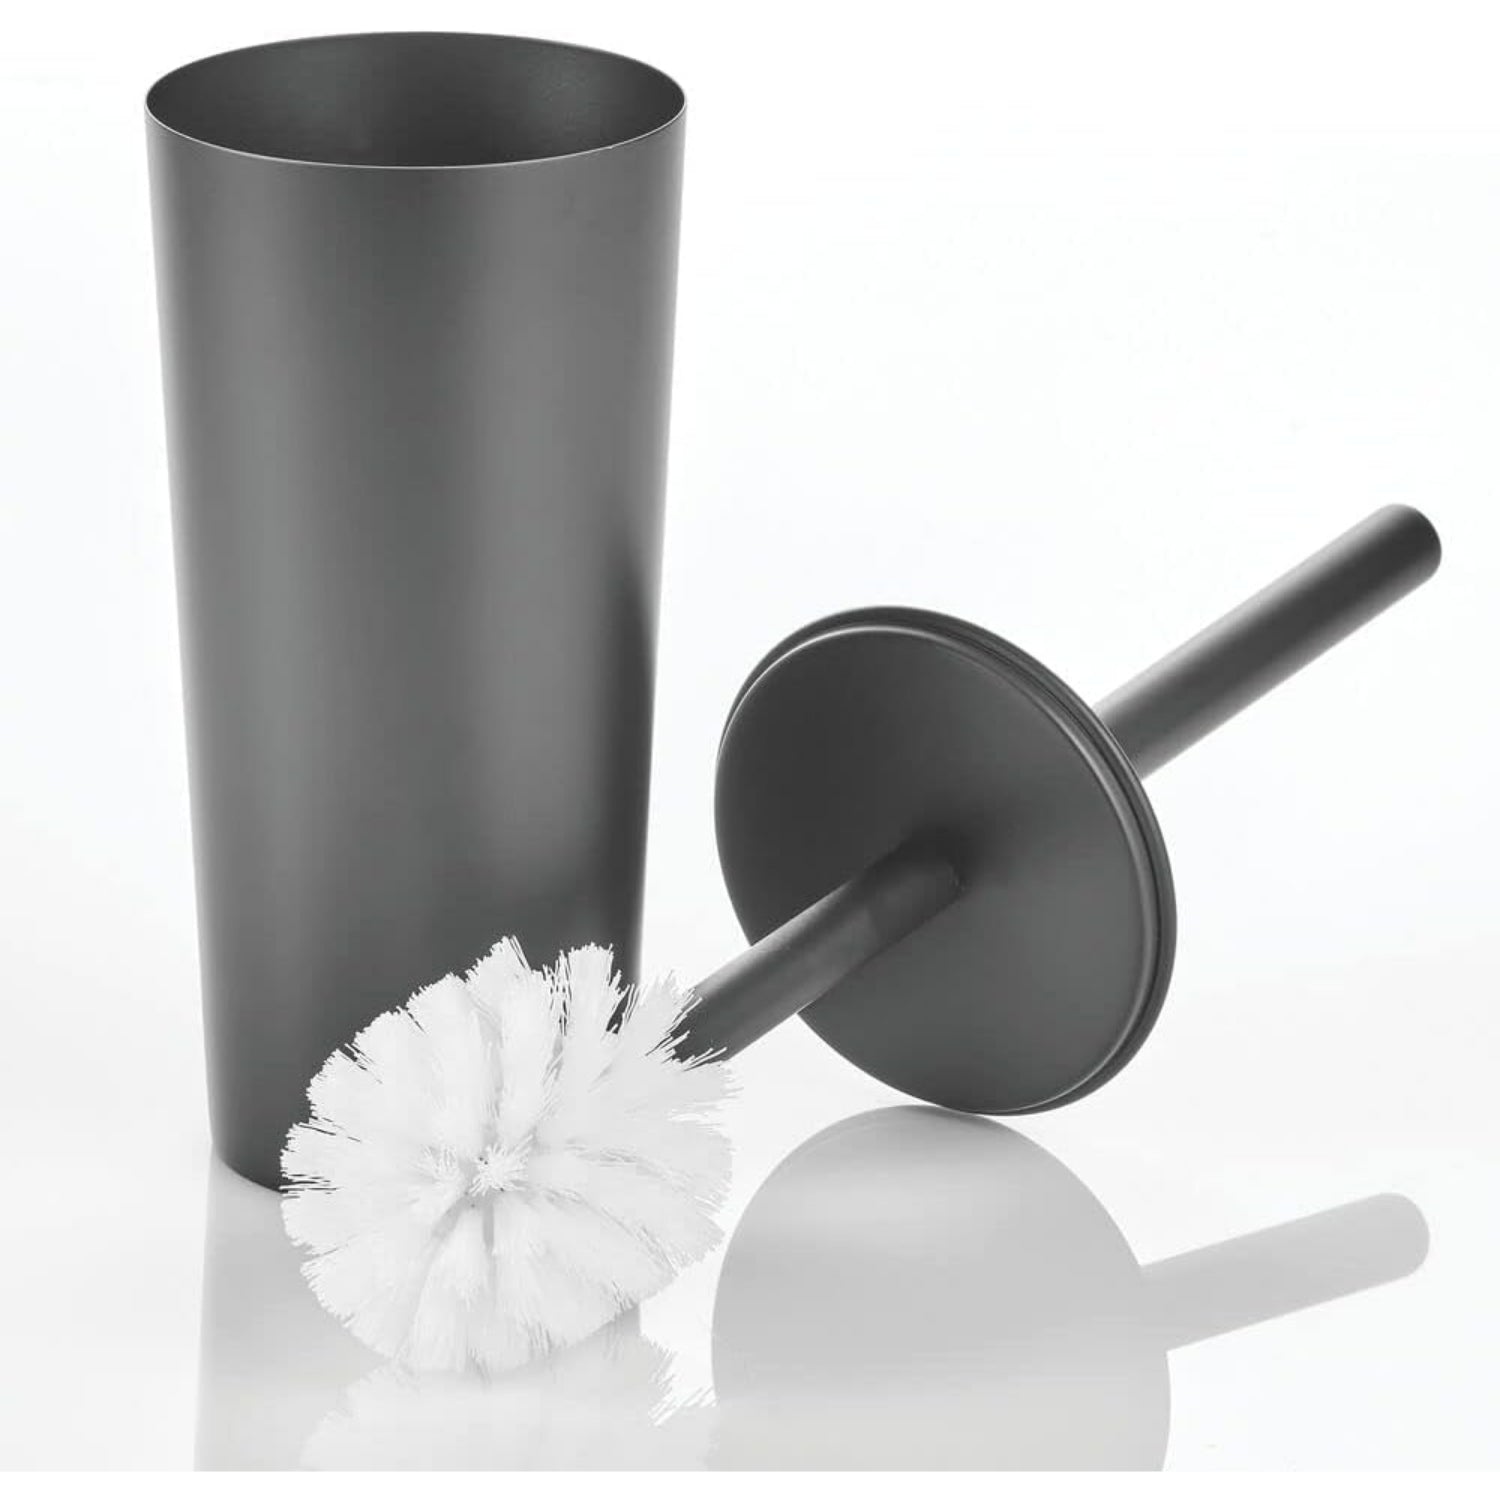 mDesign Steel Toilet Bowl Brush and Holder Combo, Mirri Collection - Graphite Gray